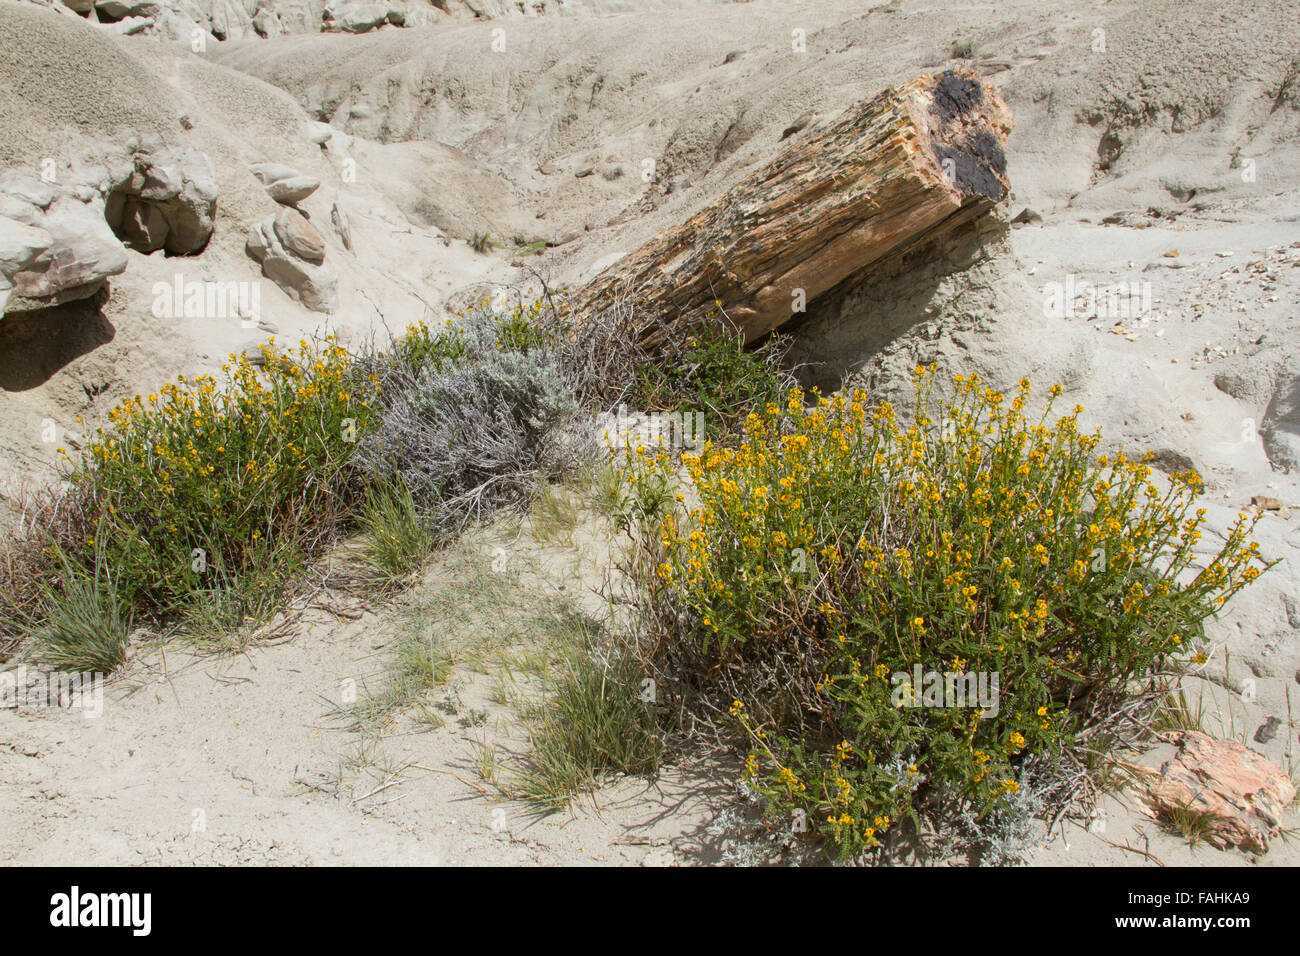 Petrified logs amid scrub brush and spring flowers in desert of La Leona Petrified Forest, Patagonia, Argentina. Stock Photo